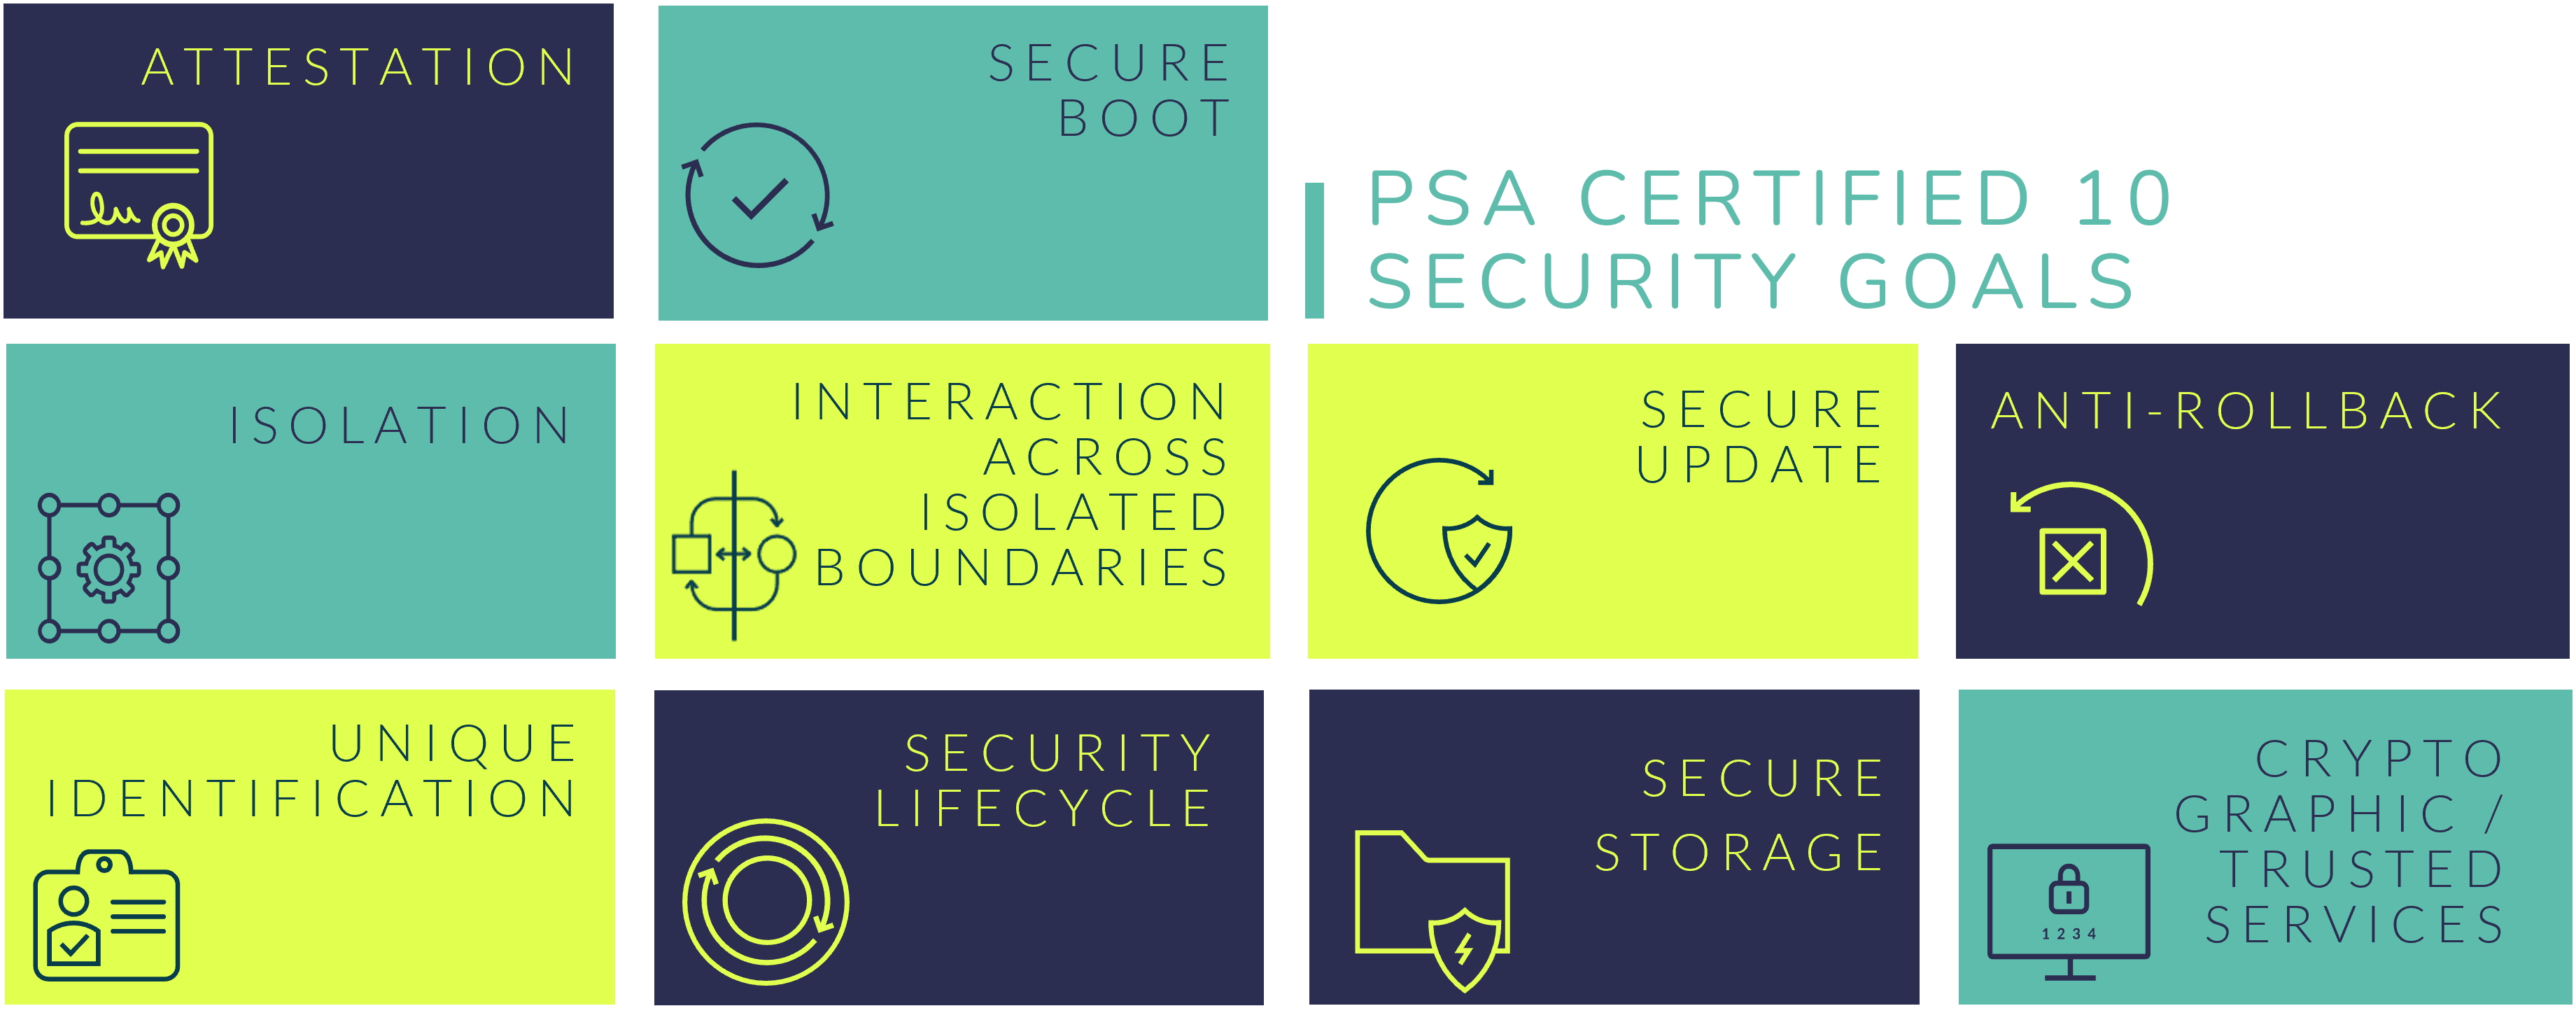 While all IoT device have unique security requirements the PSA Certified 10 Security Goals outline high level functions that should be implemented into every connected device.